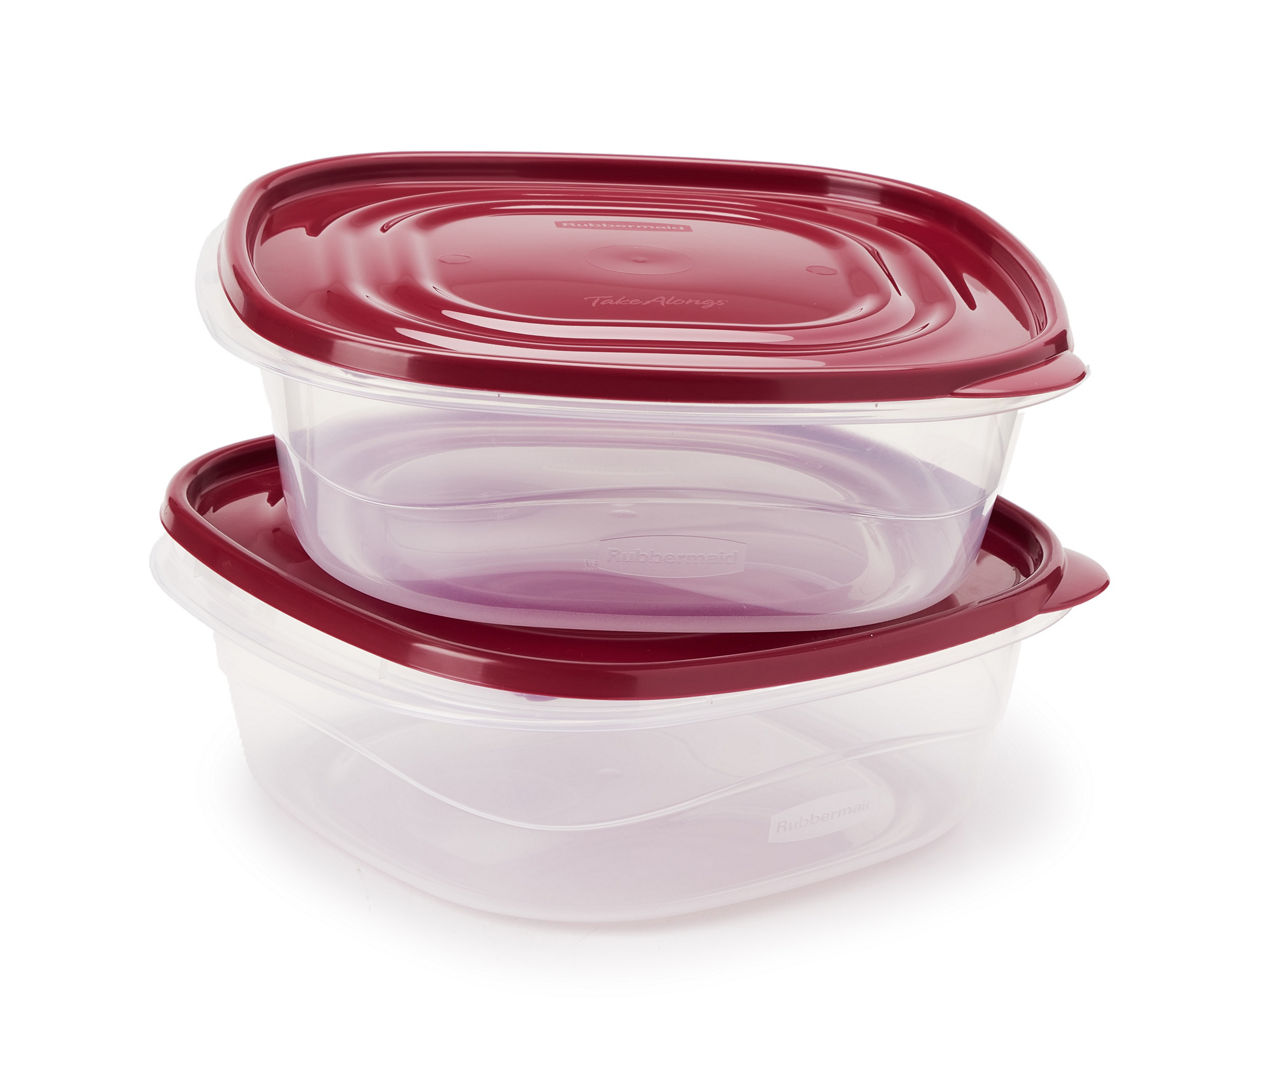 Rubbermaid TakeAlongs 11.7 Cup Food Storage Containers, Set of 2, Rhubarb  Red 